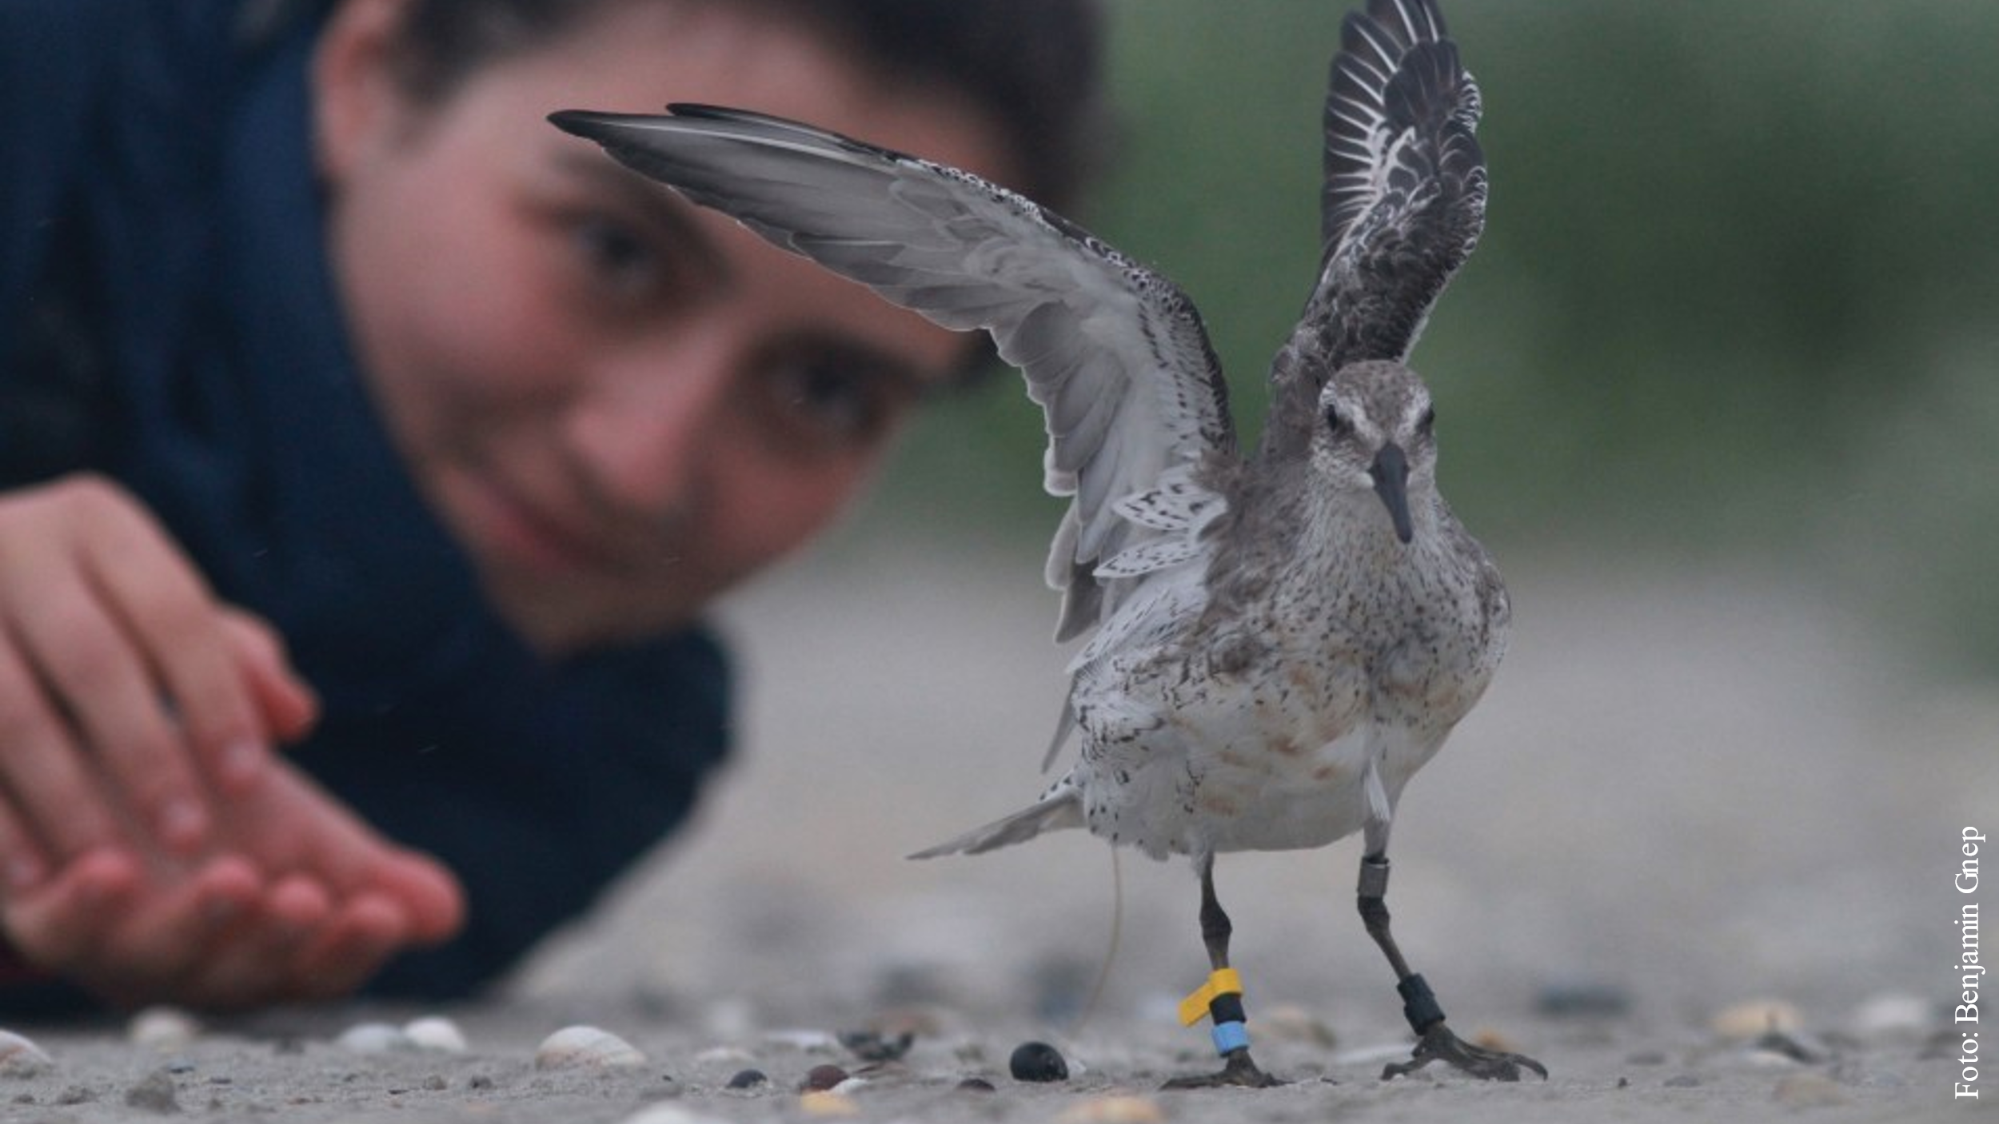 A tagged red knot released by PhD student Selin Ersoy in the Wadden Sea. Photo by Benjamin Gnep.